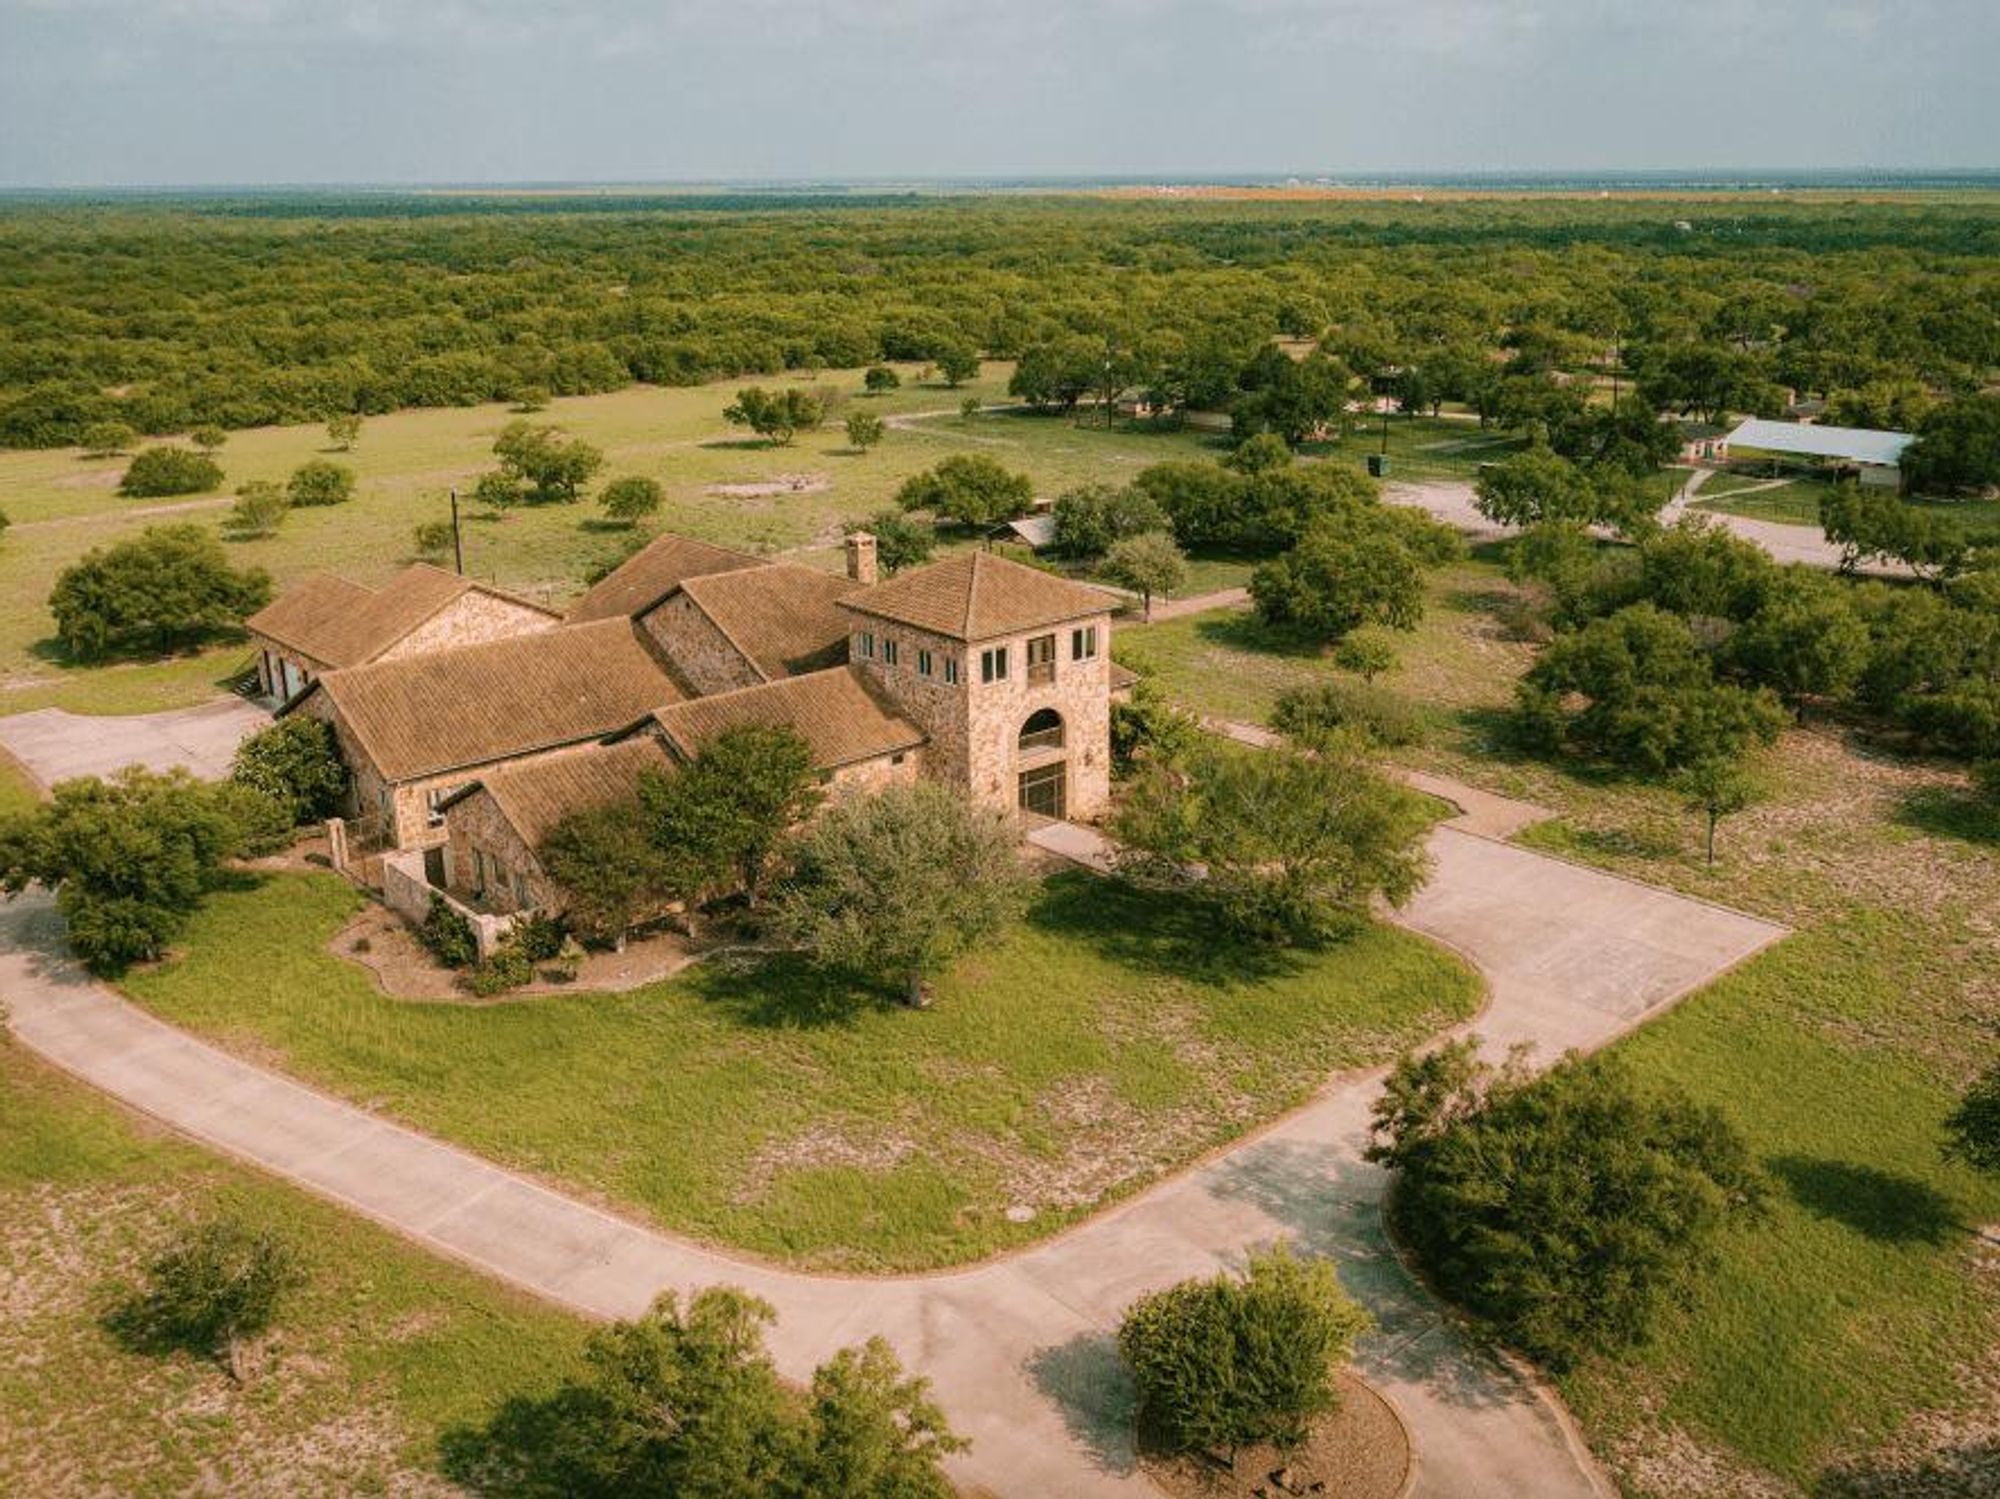 The ranch was once owned by the family of the late Texas politician Lloyd Bentsen.